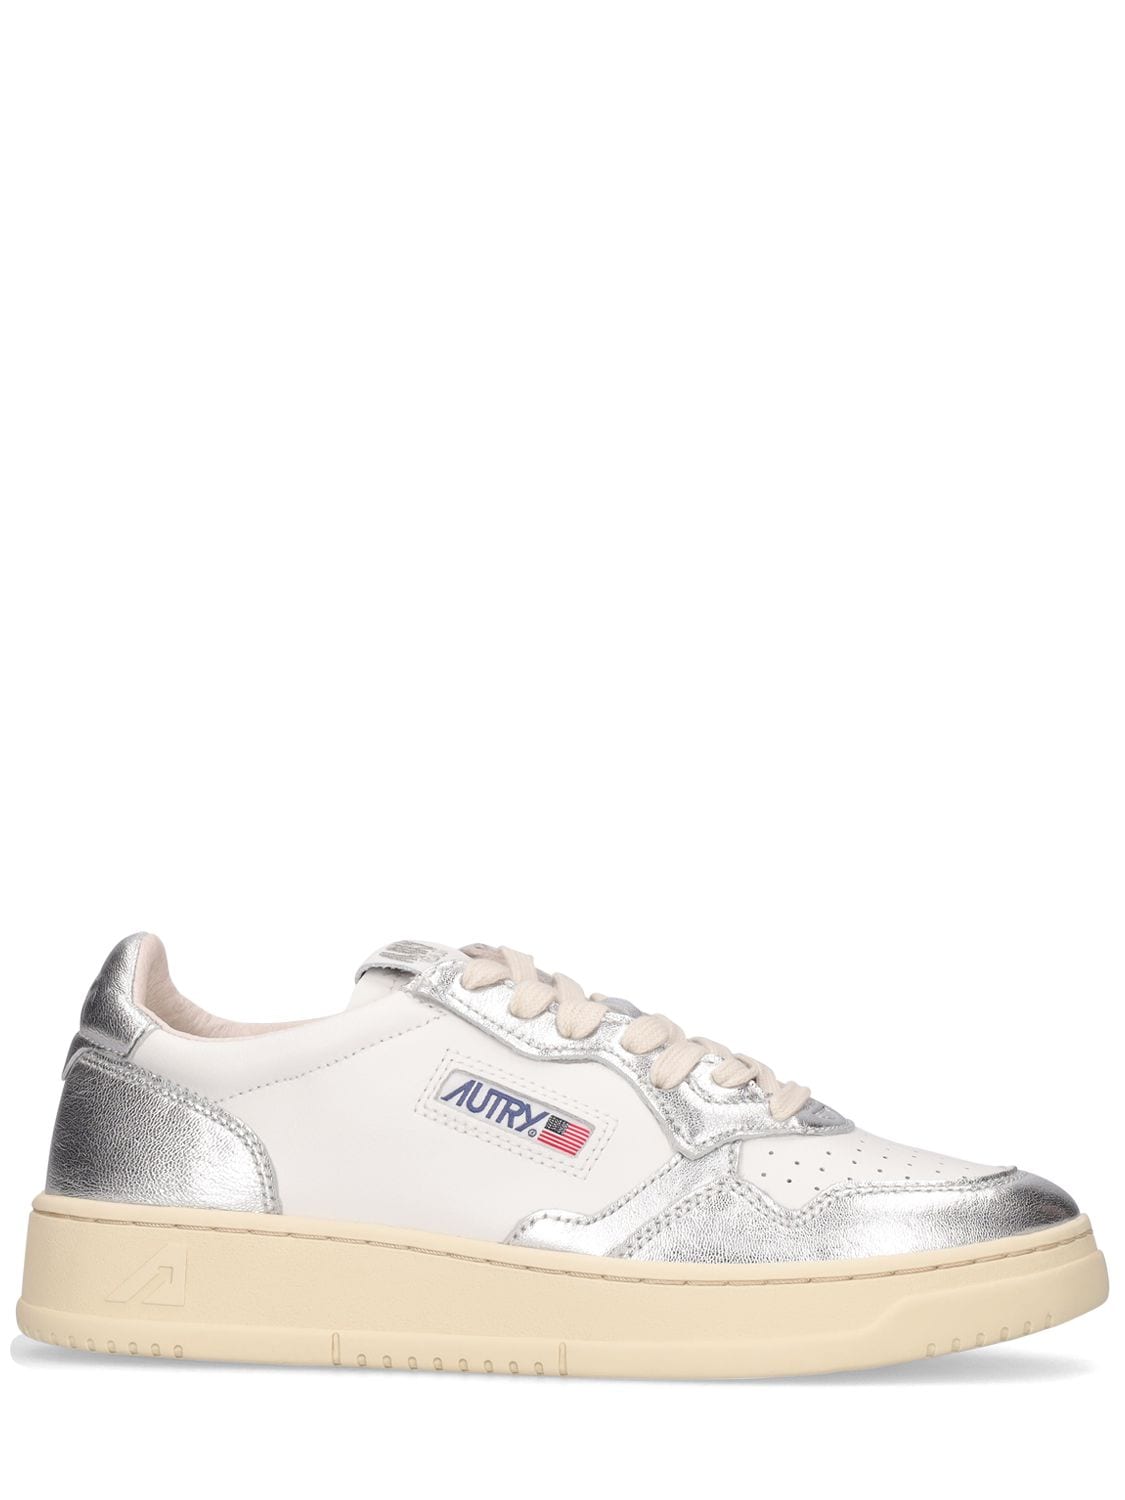 Autry - 35mm medalist low sneakers - White/Silver | Luisaviaroma